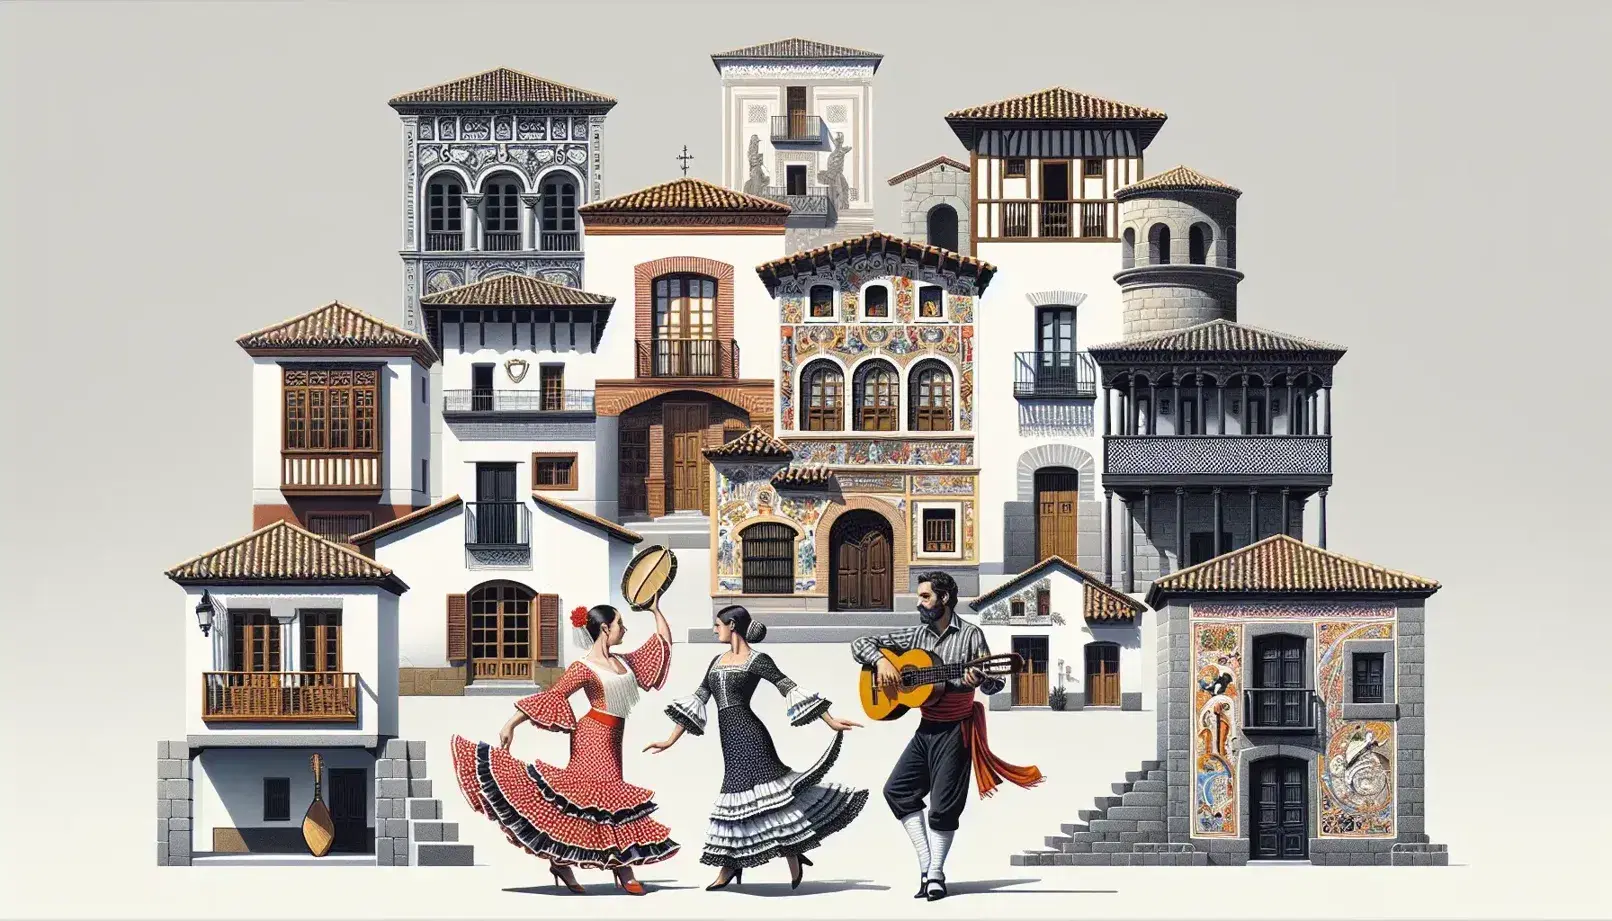 Traditional Spanish architecture and cultural attire with an Andalusian flamenco dancer and Galician bagpiper, showcasing Spain's regional diversity.